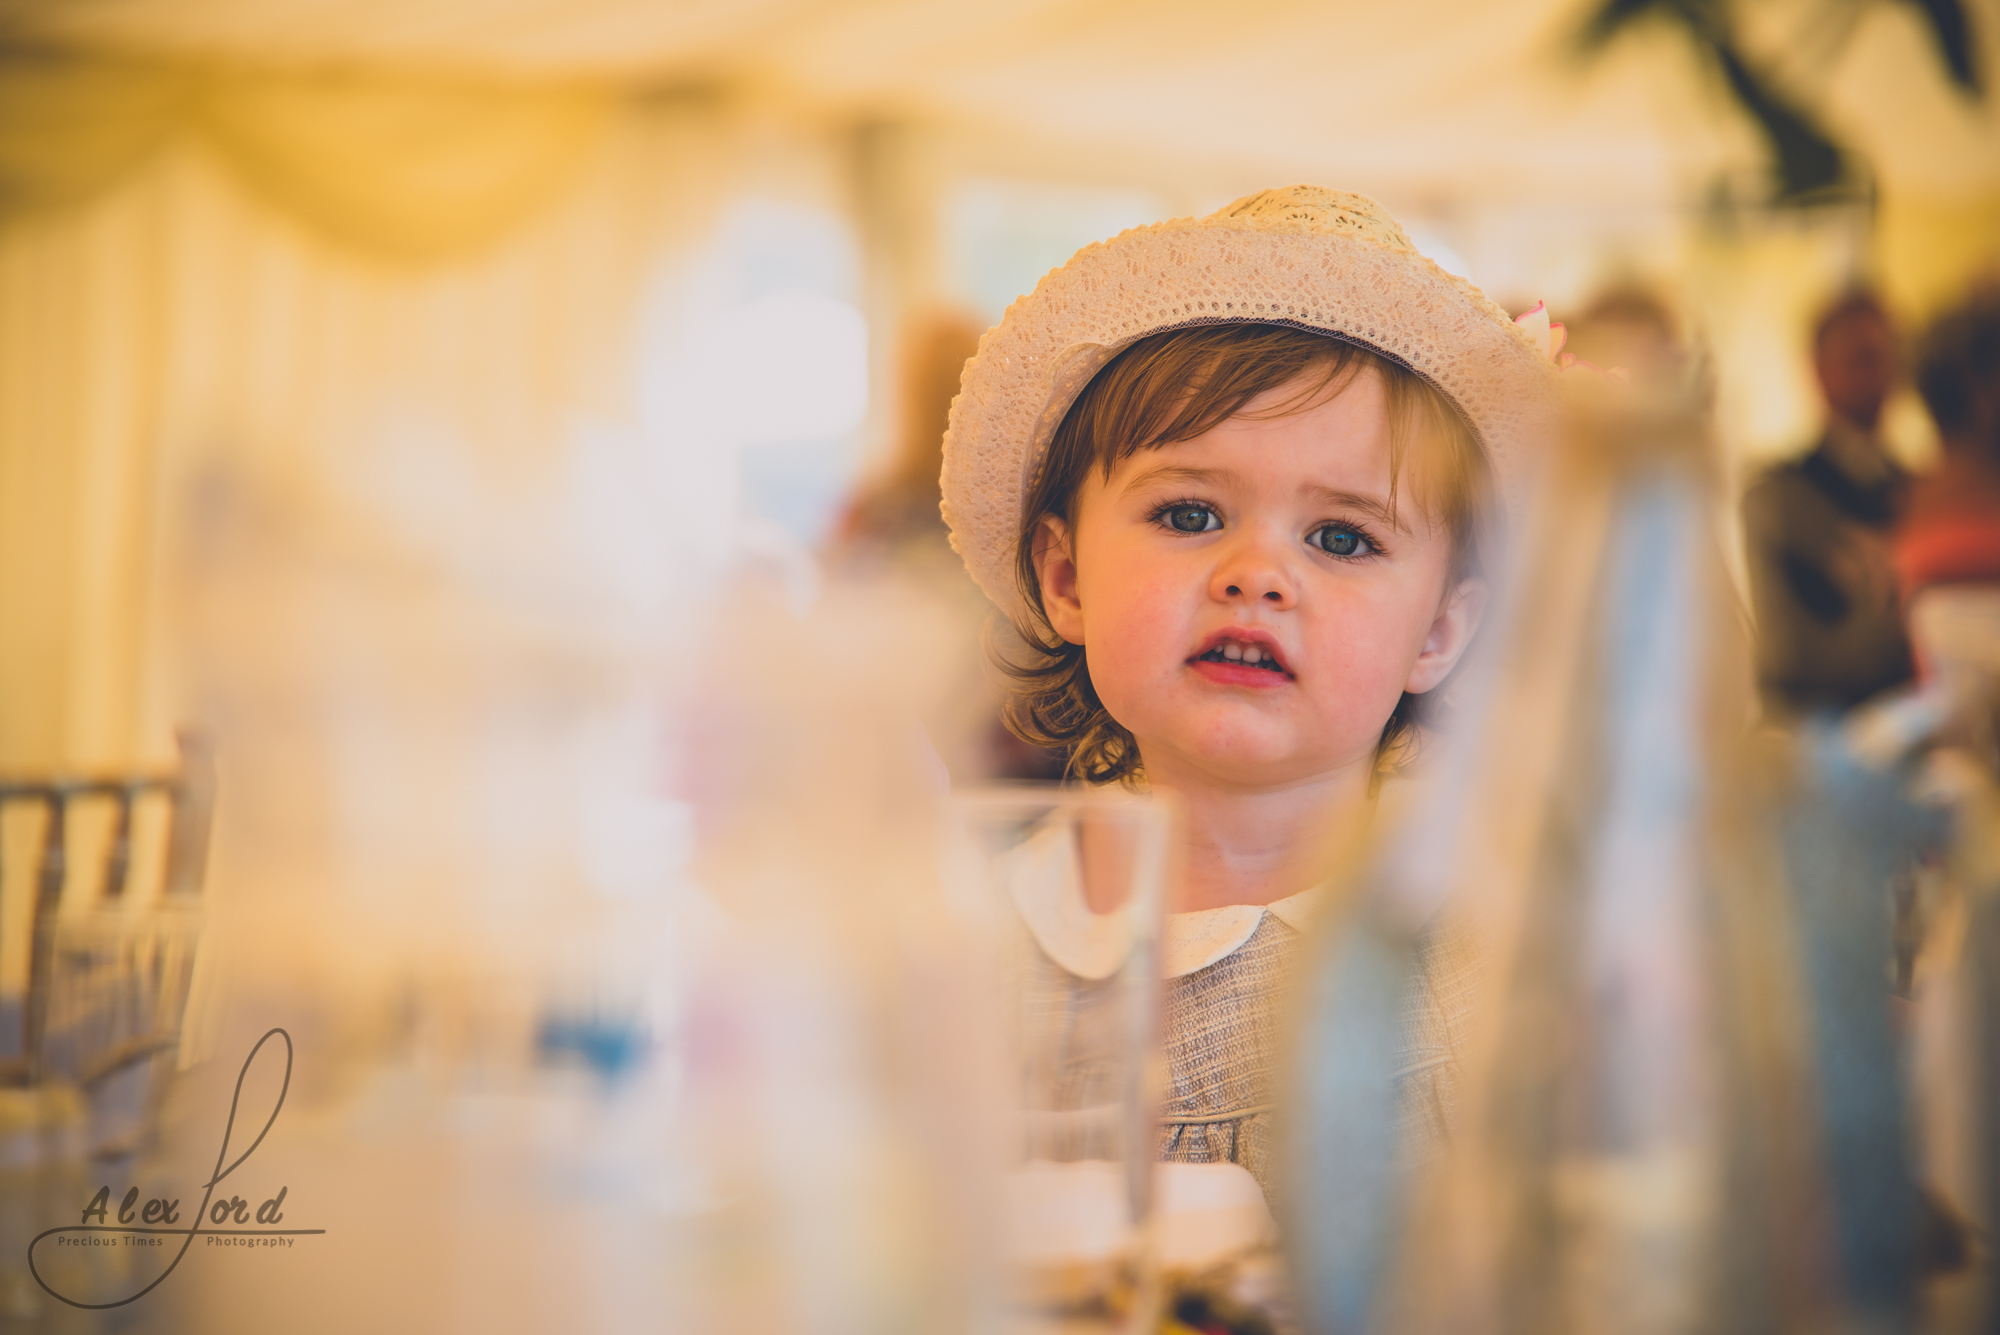 A young girl wedding guest sits at a table at ding breakfast, partly hidden by the glasses on the table